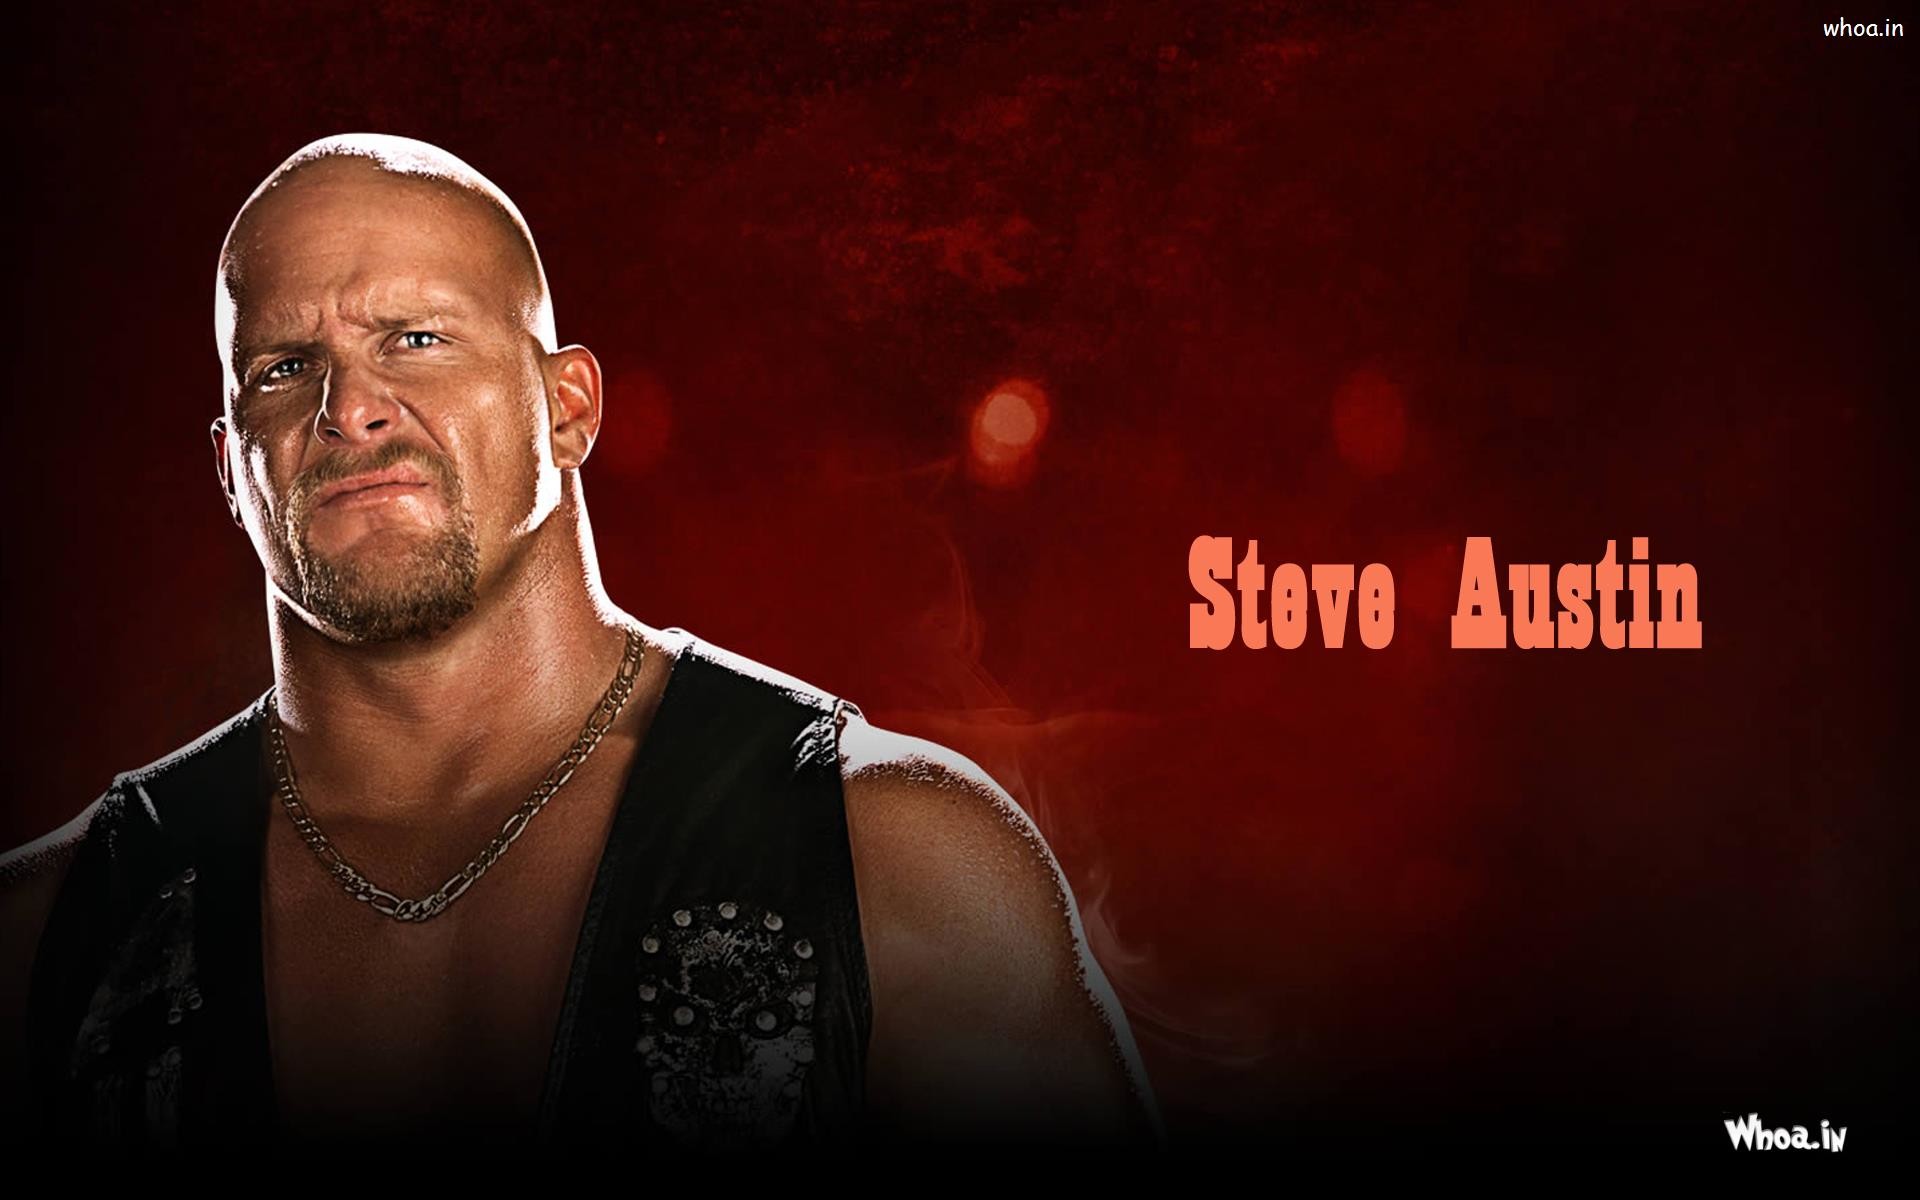 1920x1200 stone-cold-steve-austin-hd-images-8 | Stone Cold Steve Austin HD Images |  Pinterest | Stone cold steve, Steve austin and Hd images